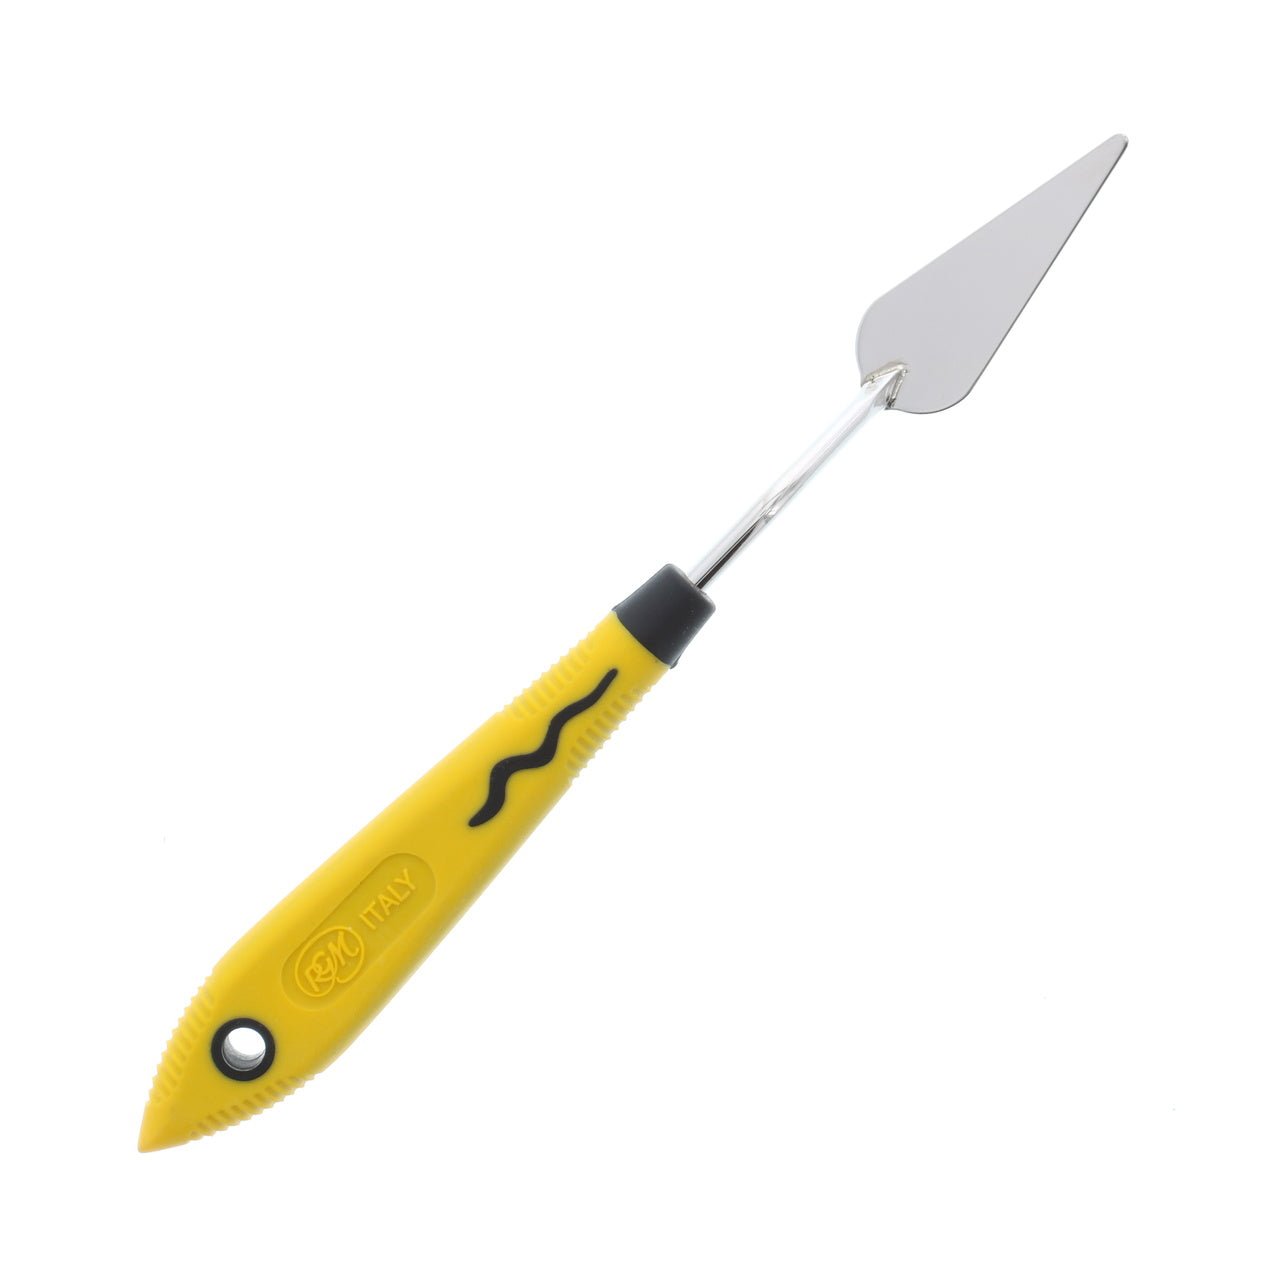 RGM Soft Grip Painting Knife #022 (Yellow Handle)